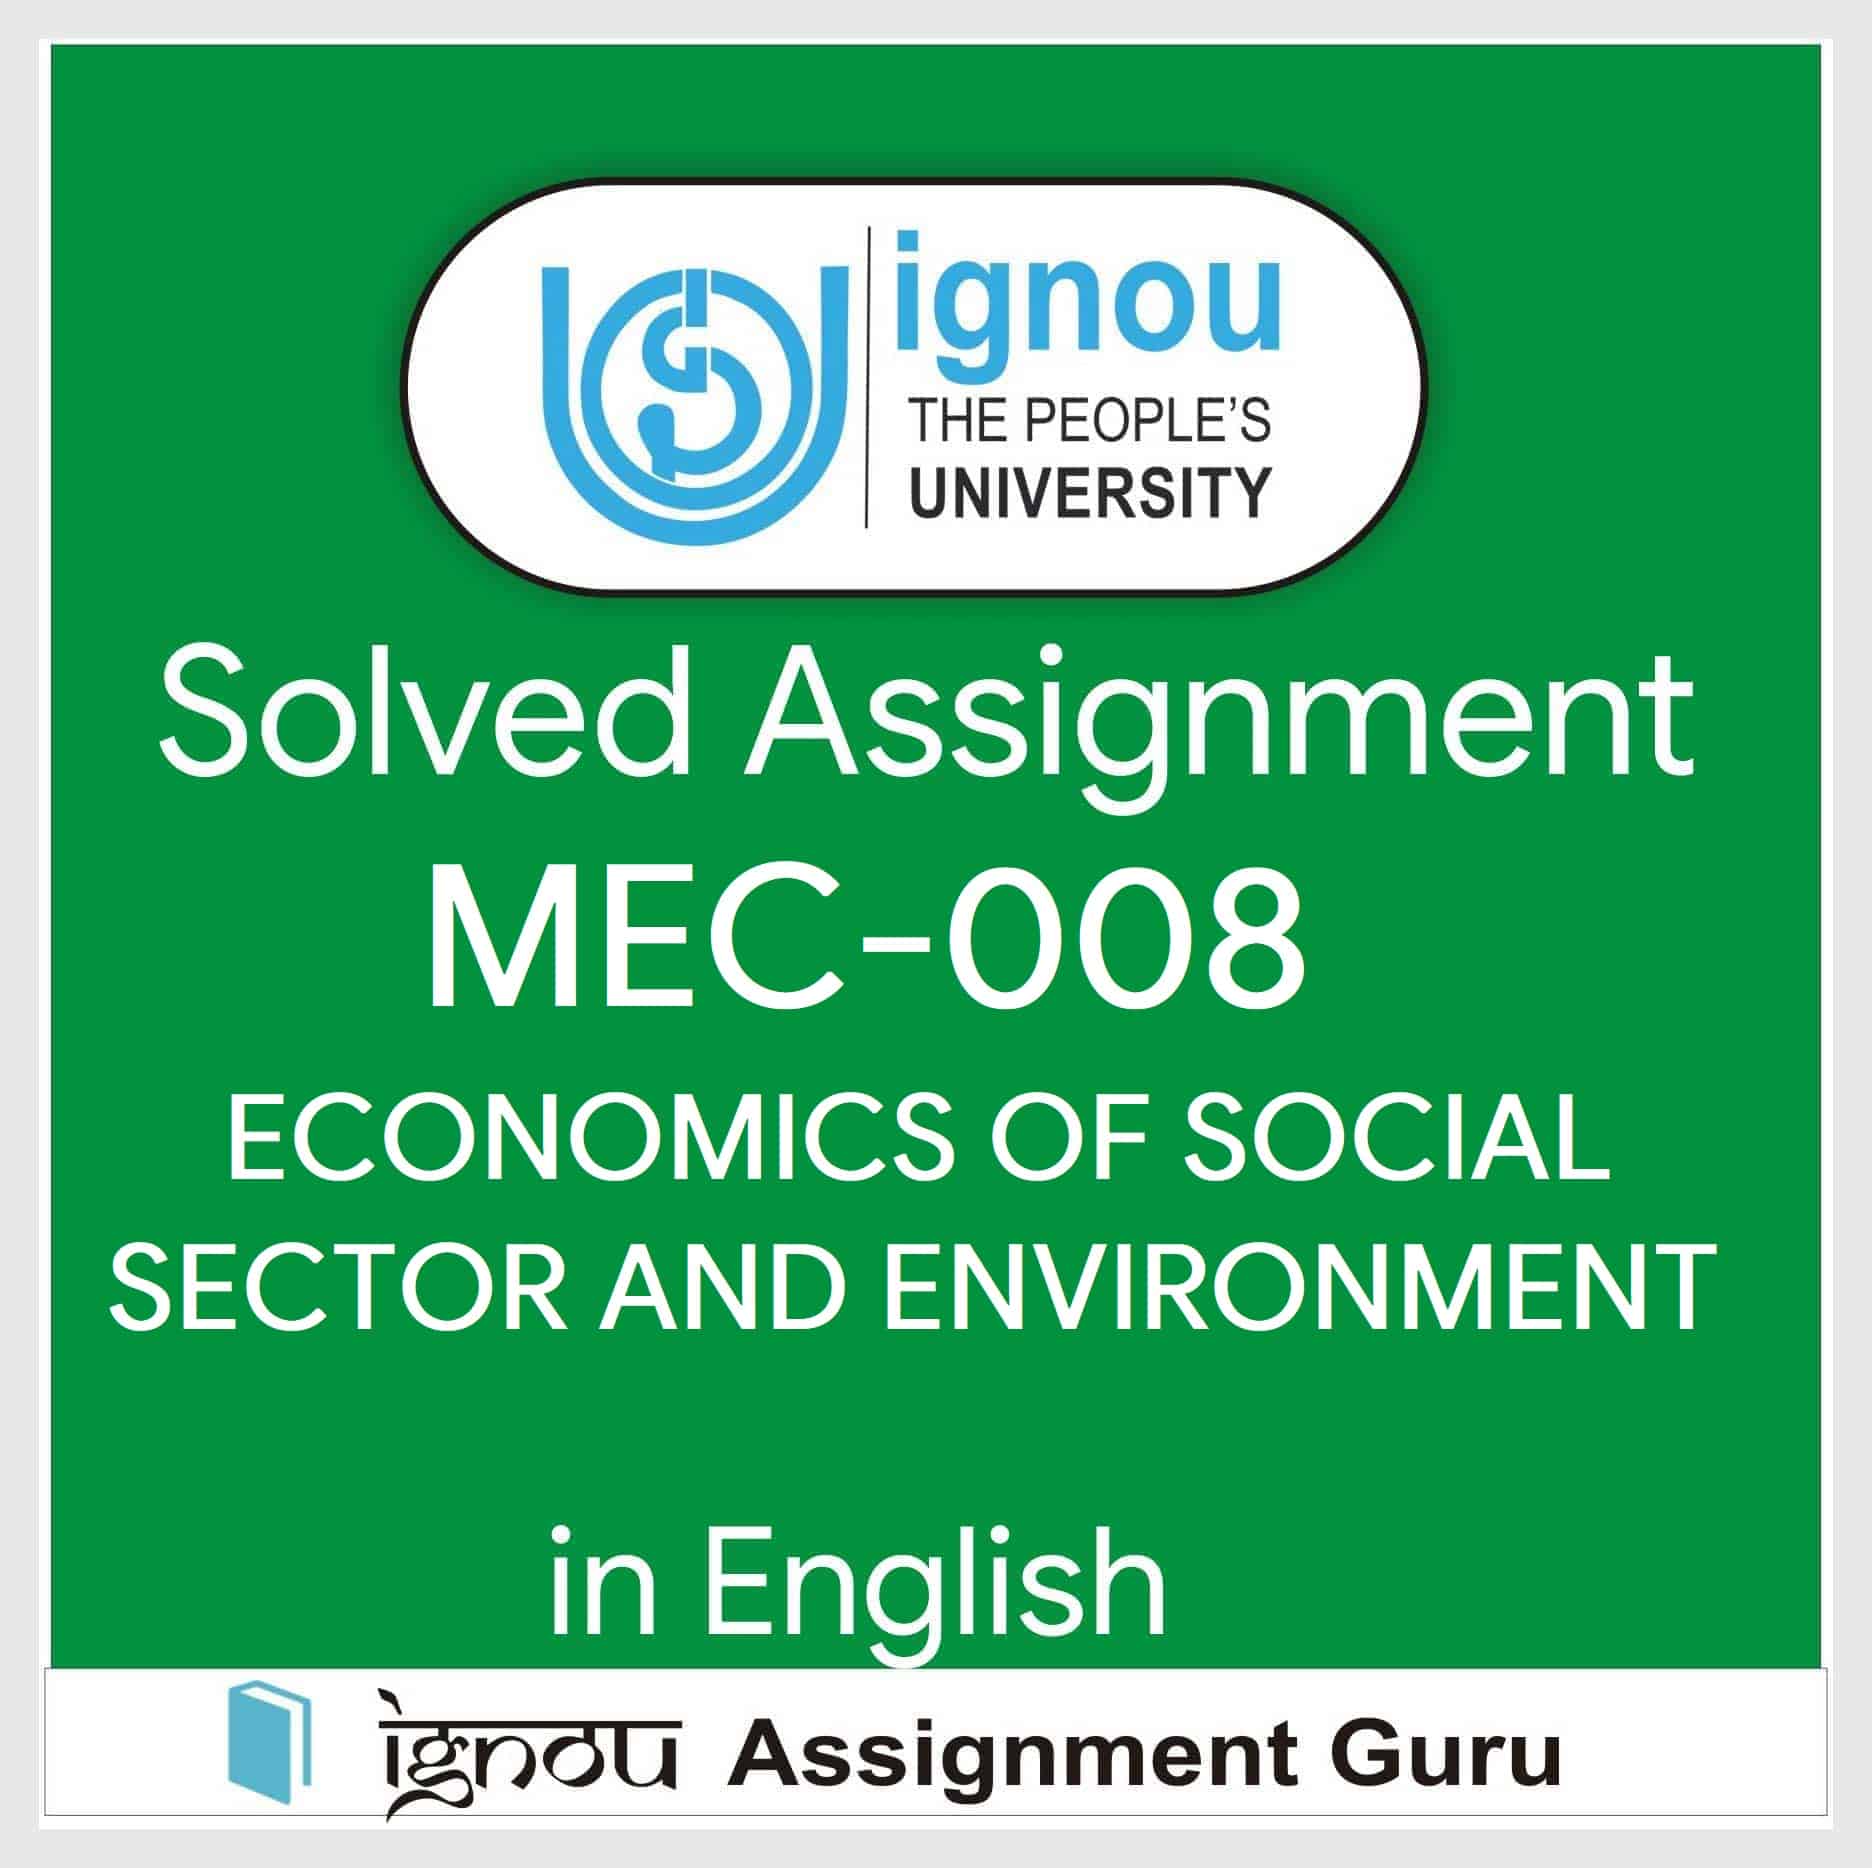 MEC-008 ECONOMICS OF SOCIAL SECTOR AND ENVIRONMENT in English Solved Assignment 2022-2023